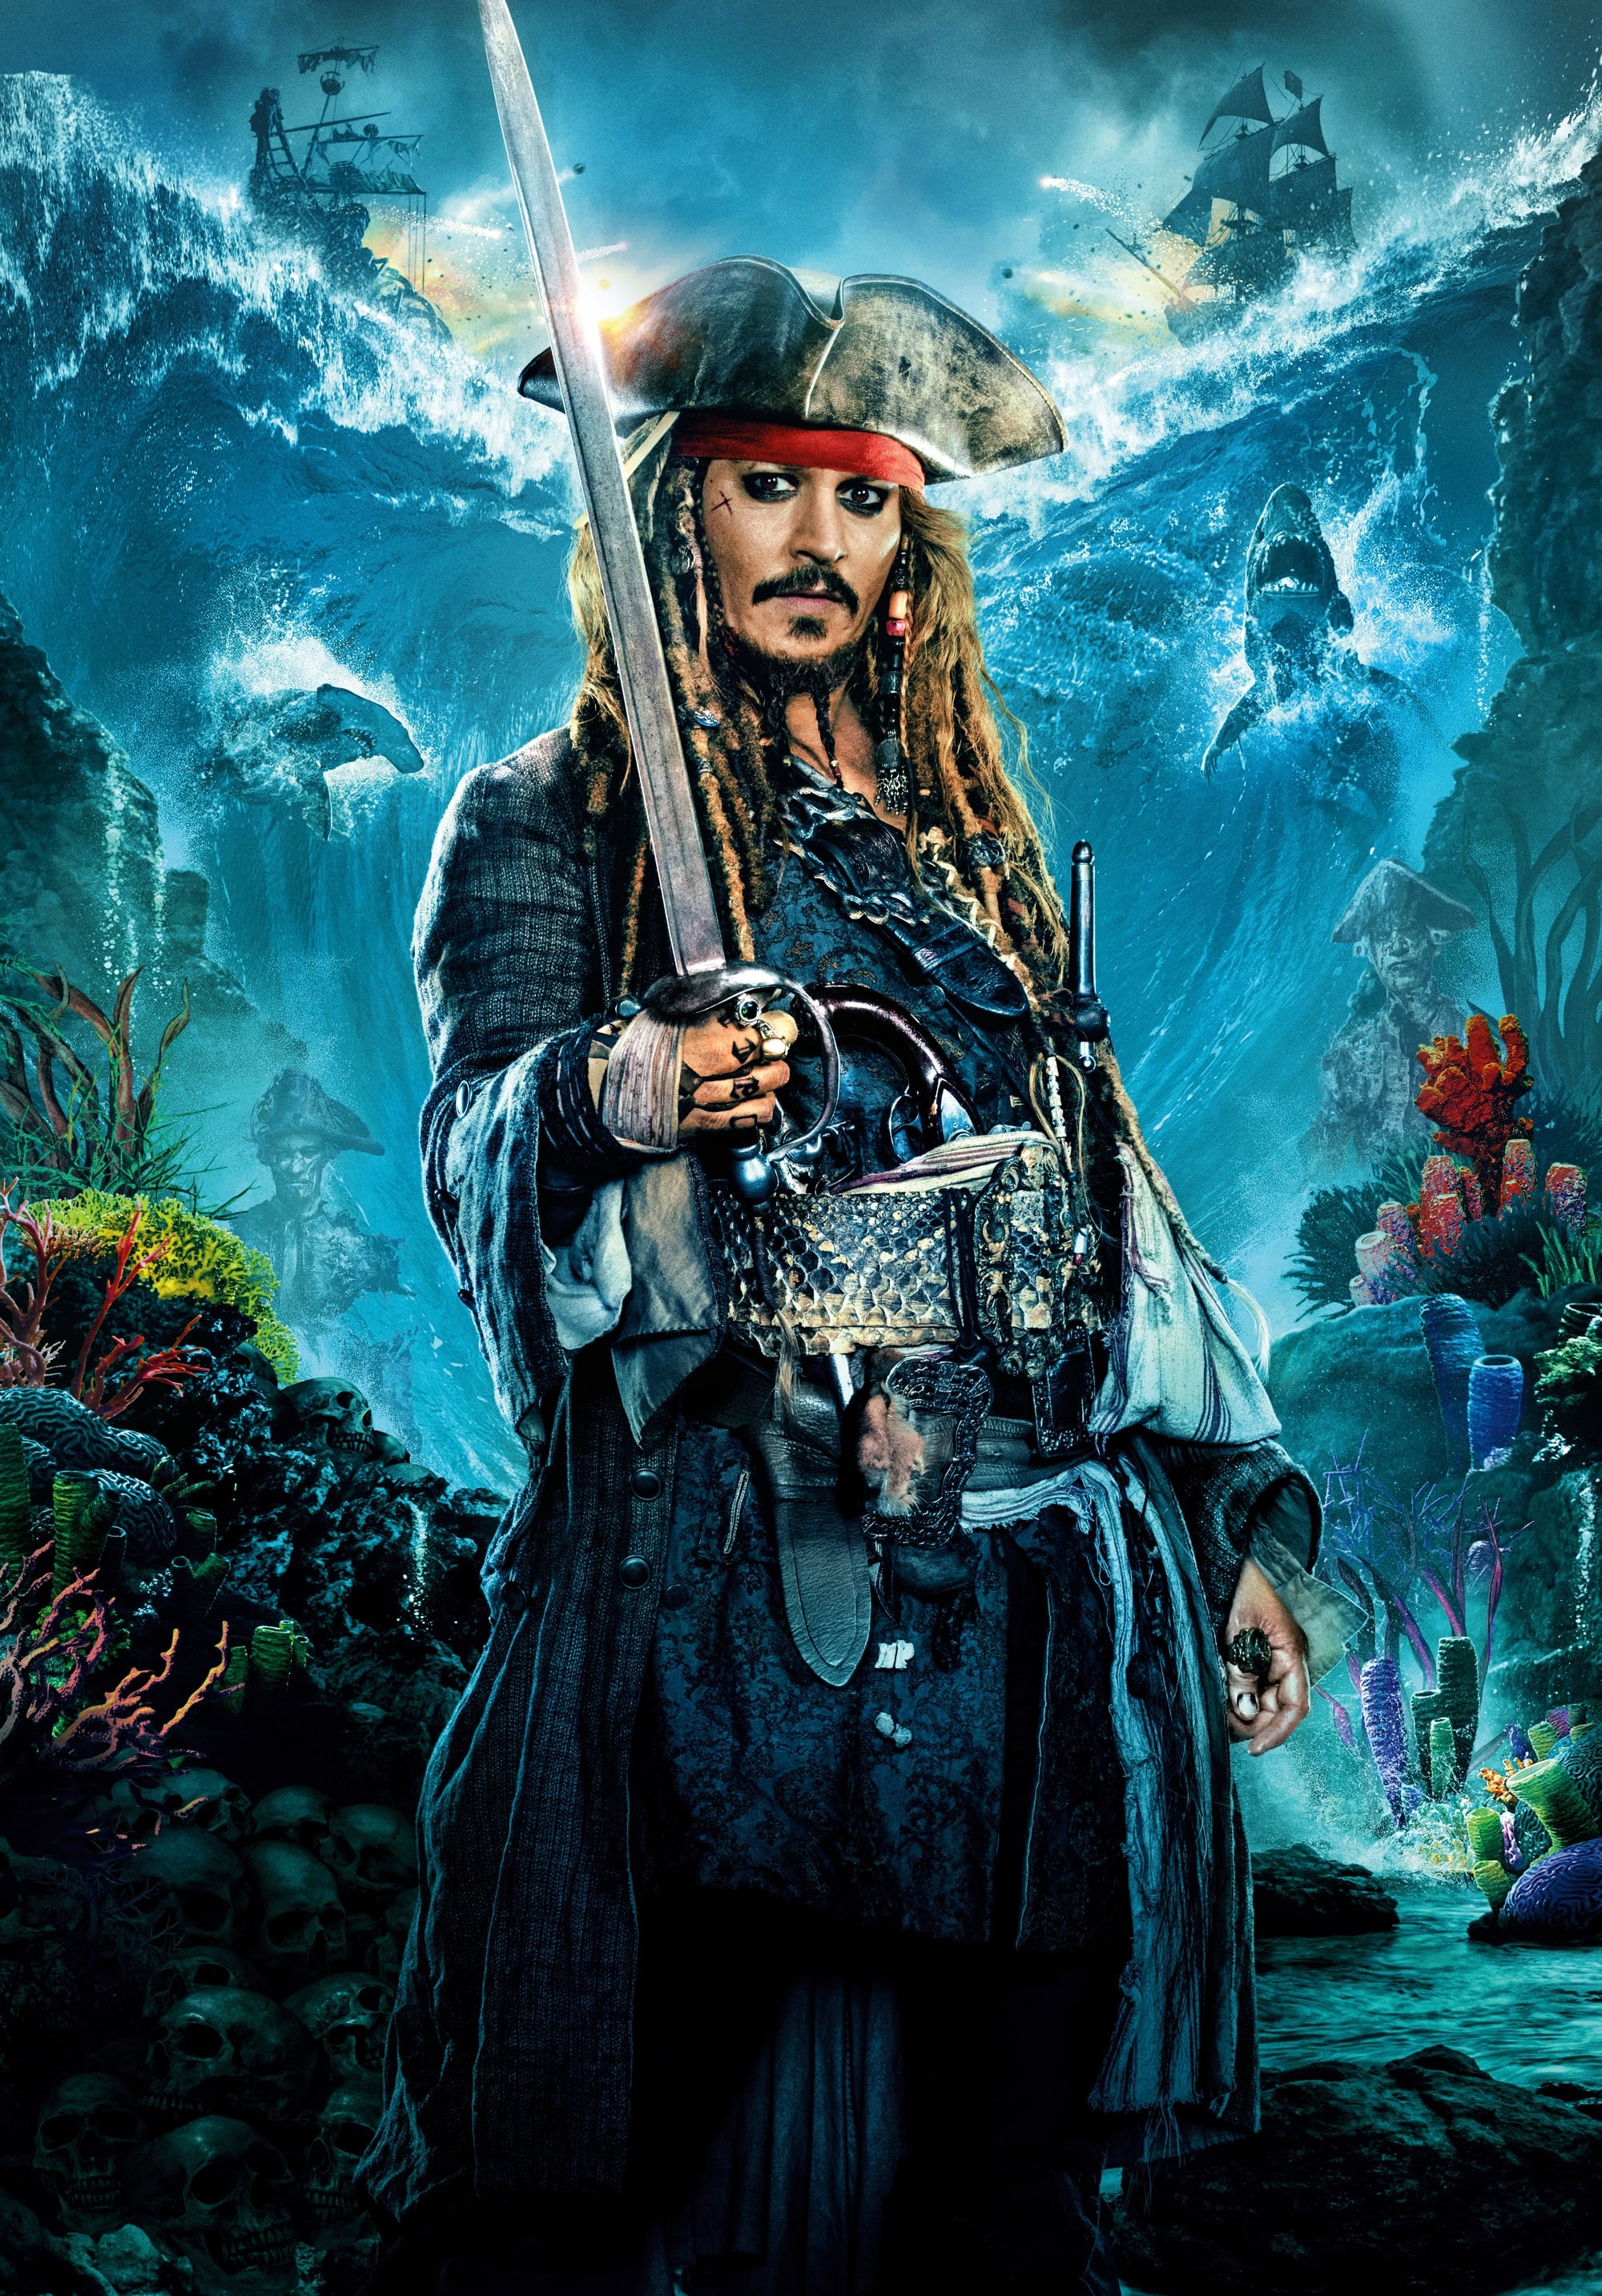 movie review of pirates of the caribbean